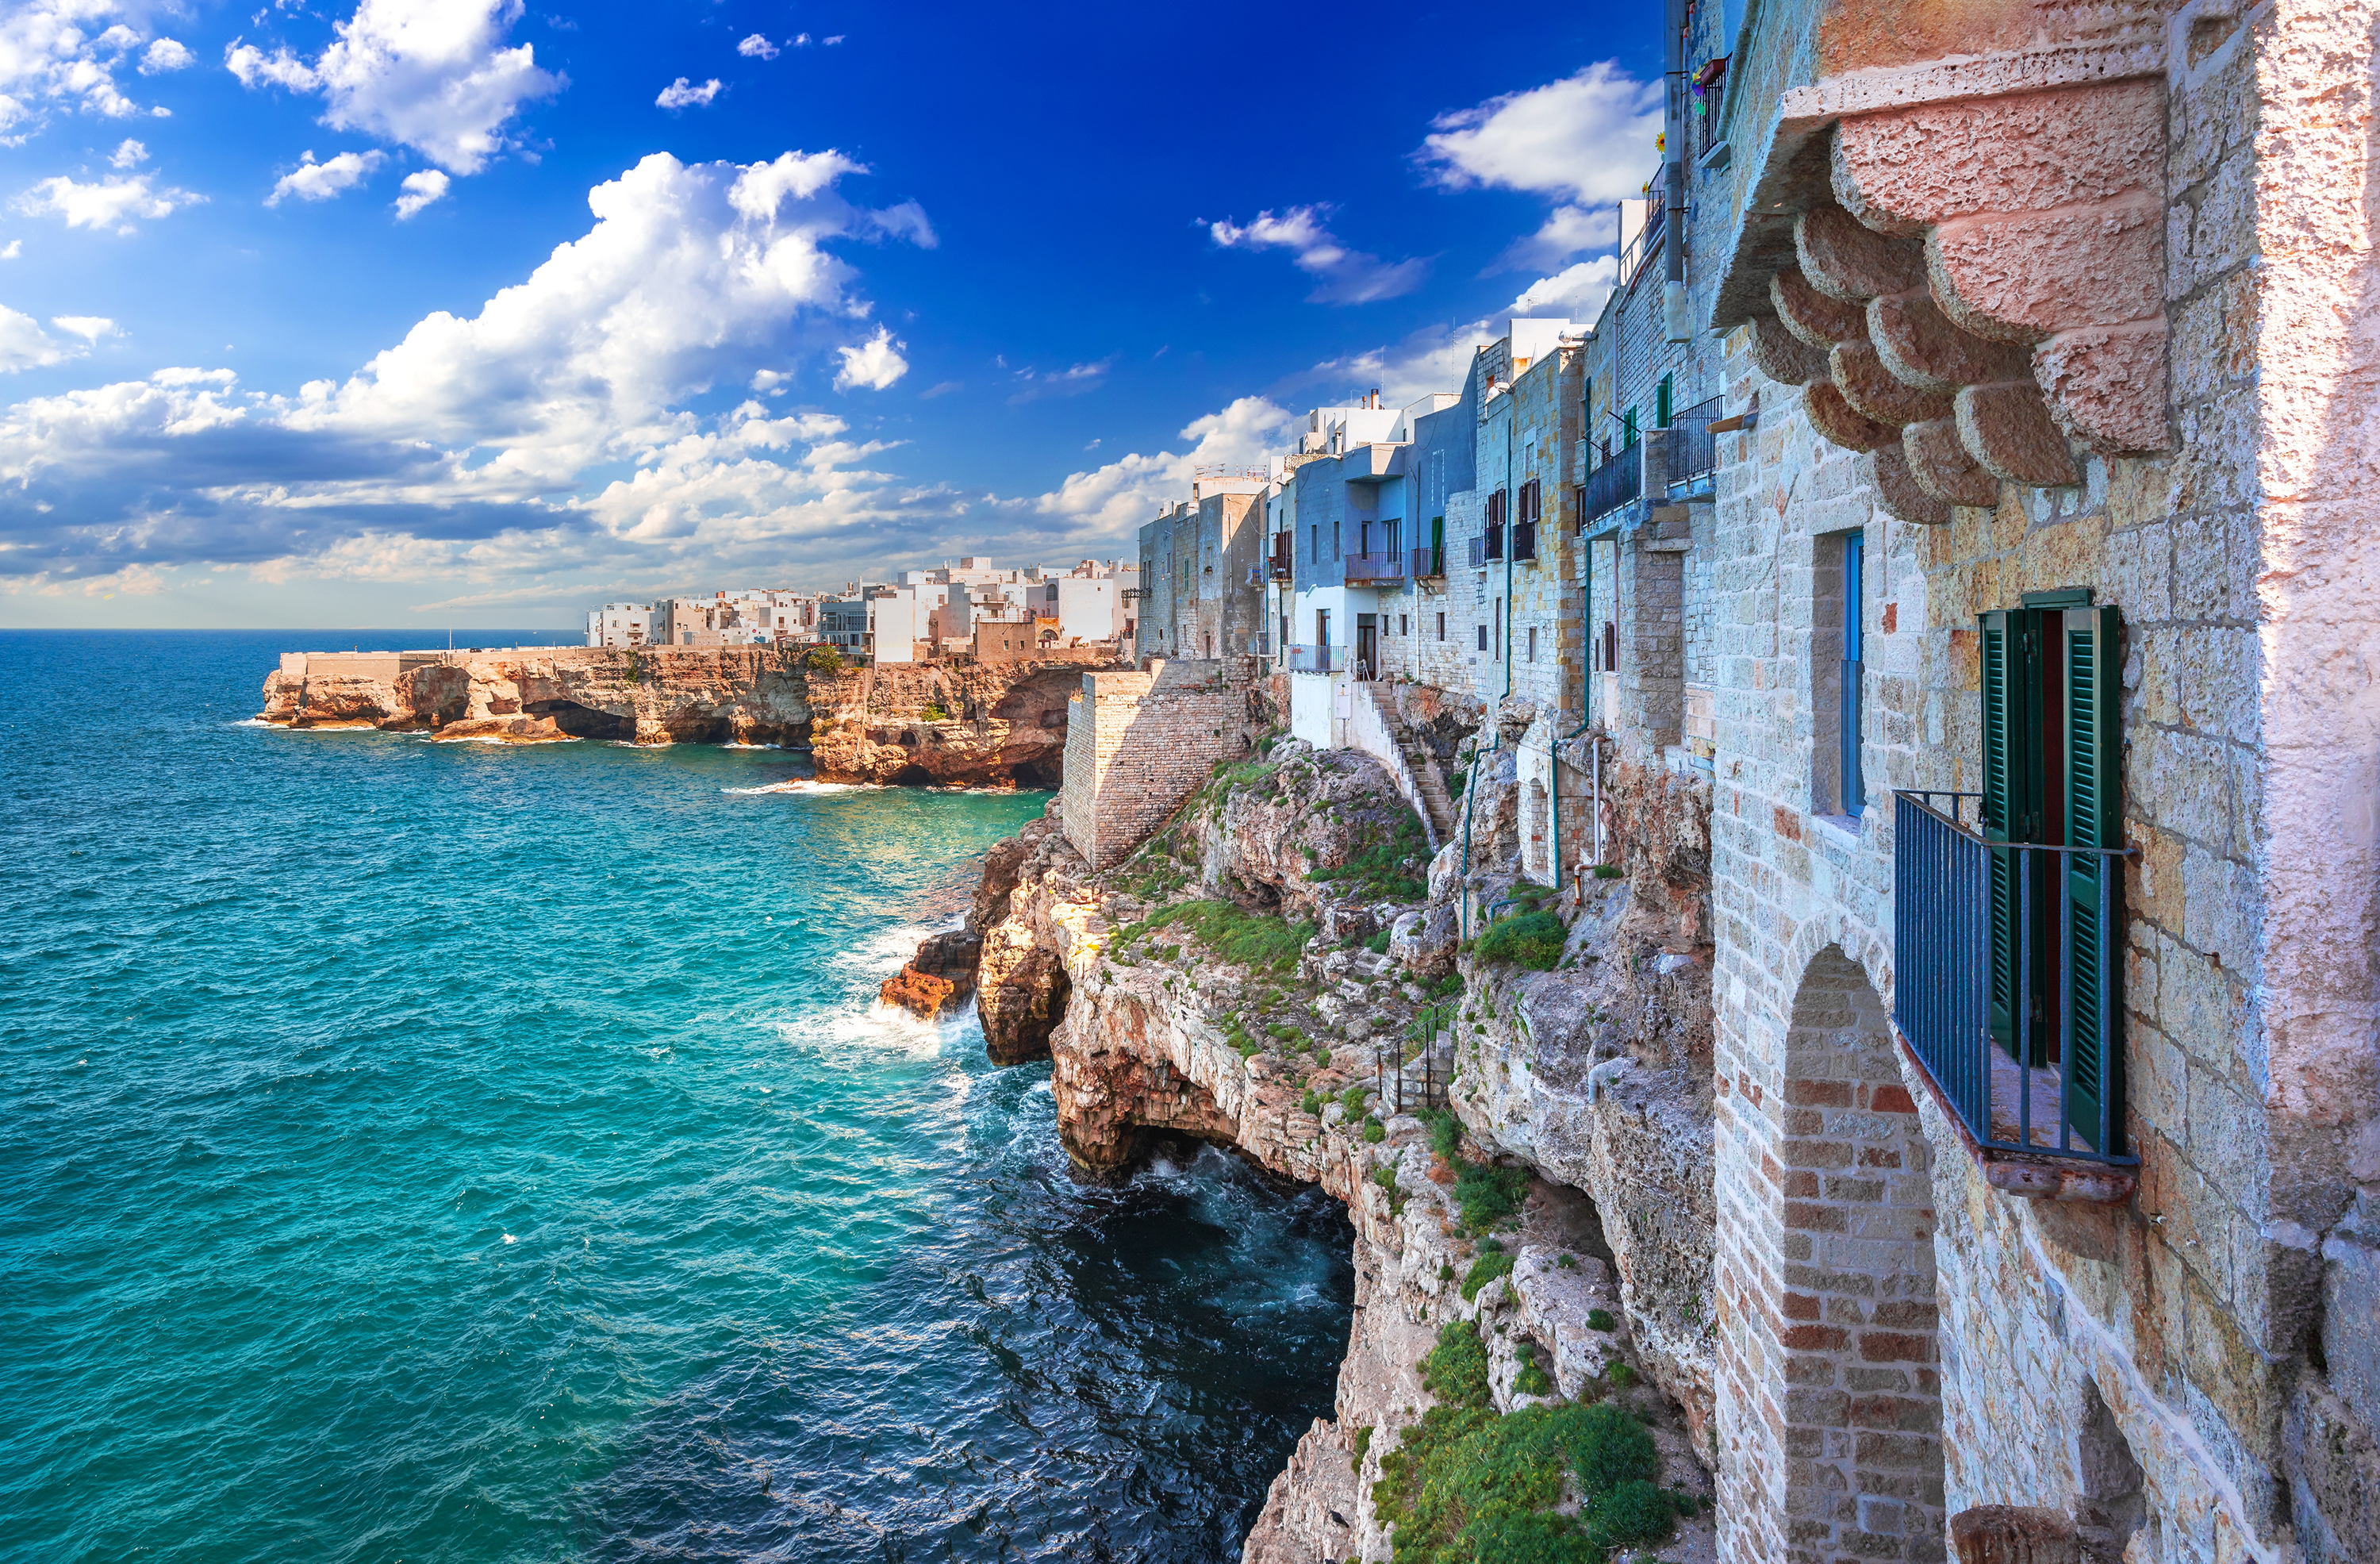 houses butting up to the coast in Polignano a Mare